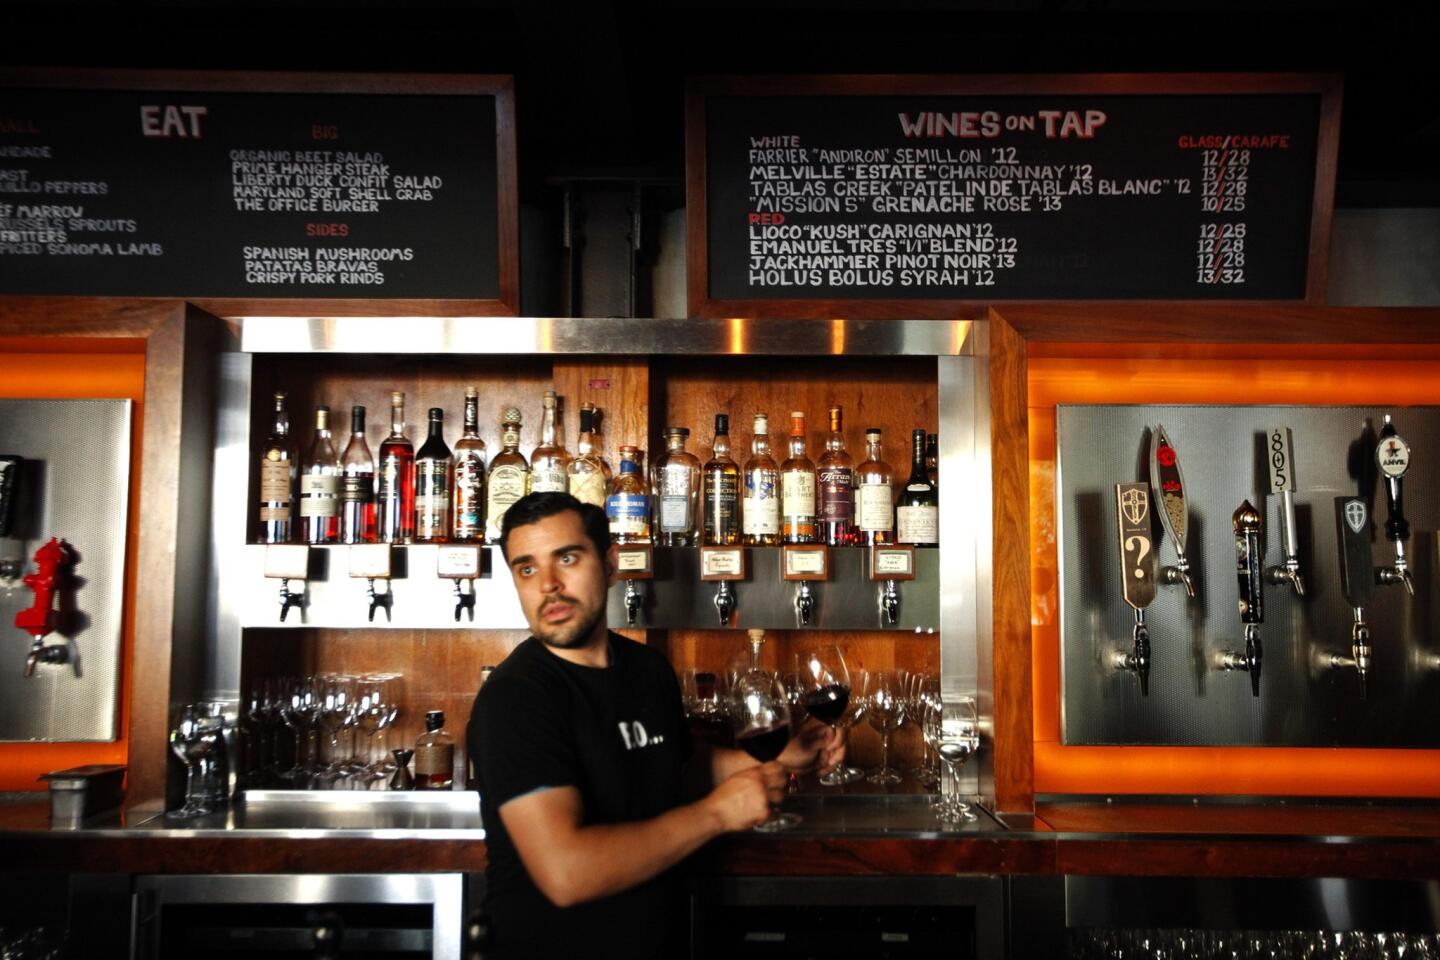 Bartender Erik Solis goes to deliver two glasses of Holus Bolus Syrah, one of the wines on tap at chef Sang Yoon's Father's Office in Culver City. The restaurant was the first in L.A. to offer wines on tap.